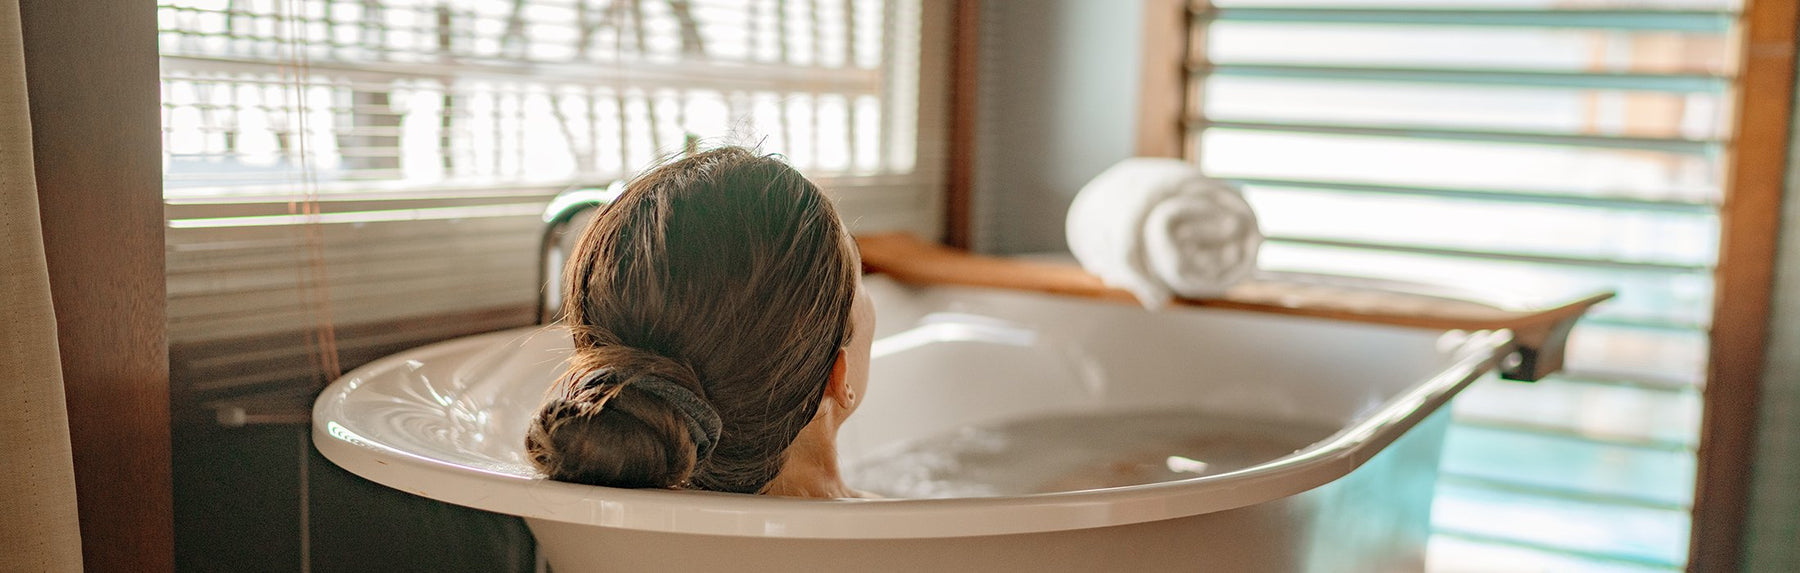 4 Ways to Prioritize Self-Care When You’re Always at Home